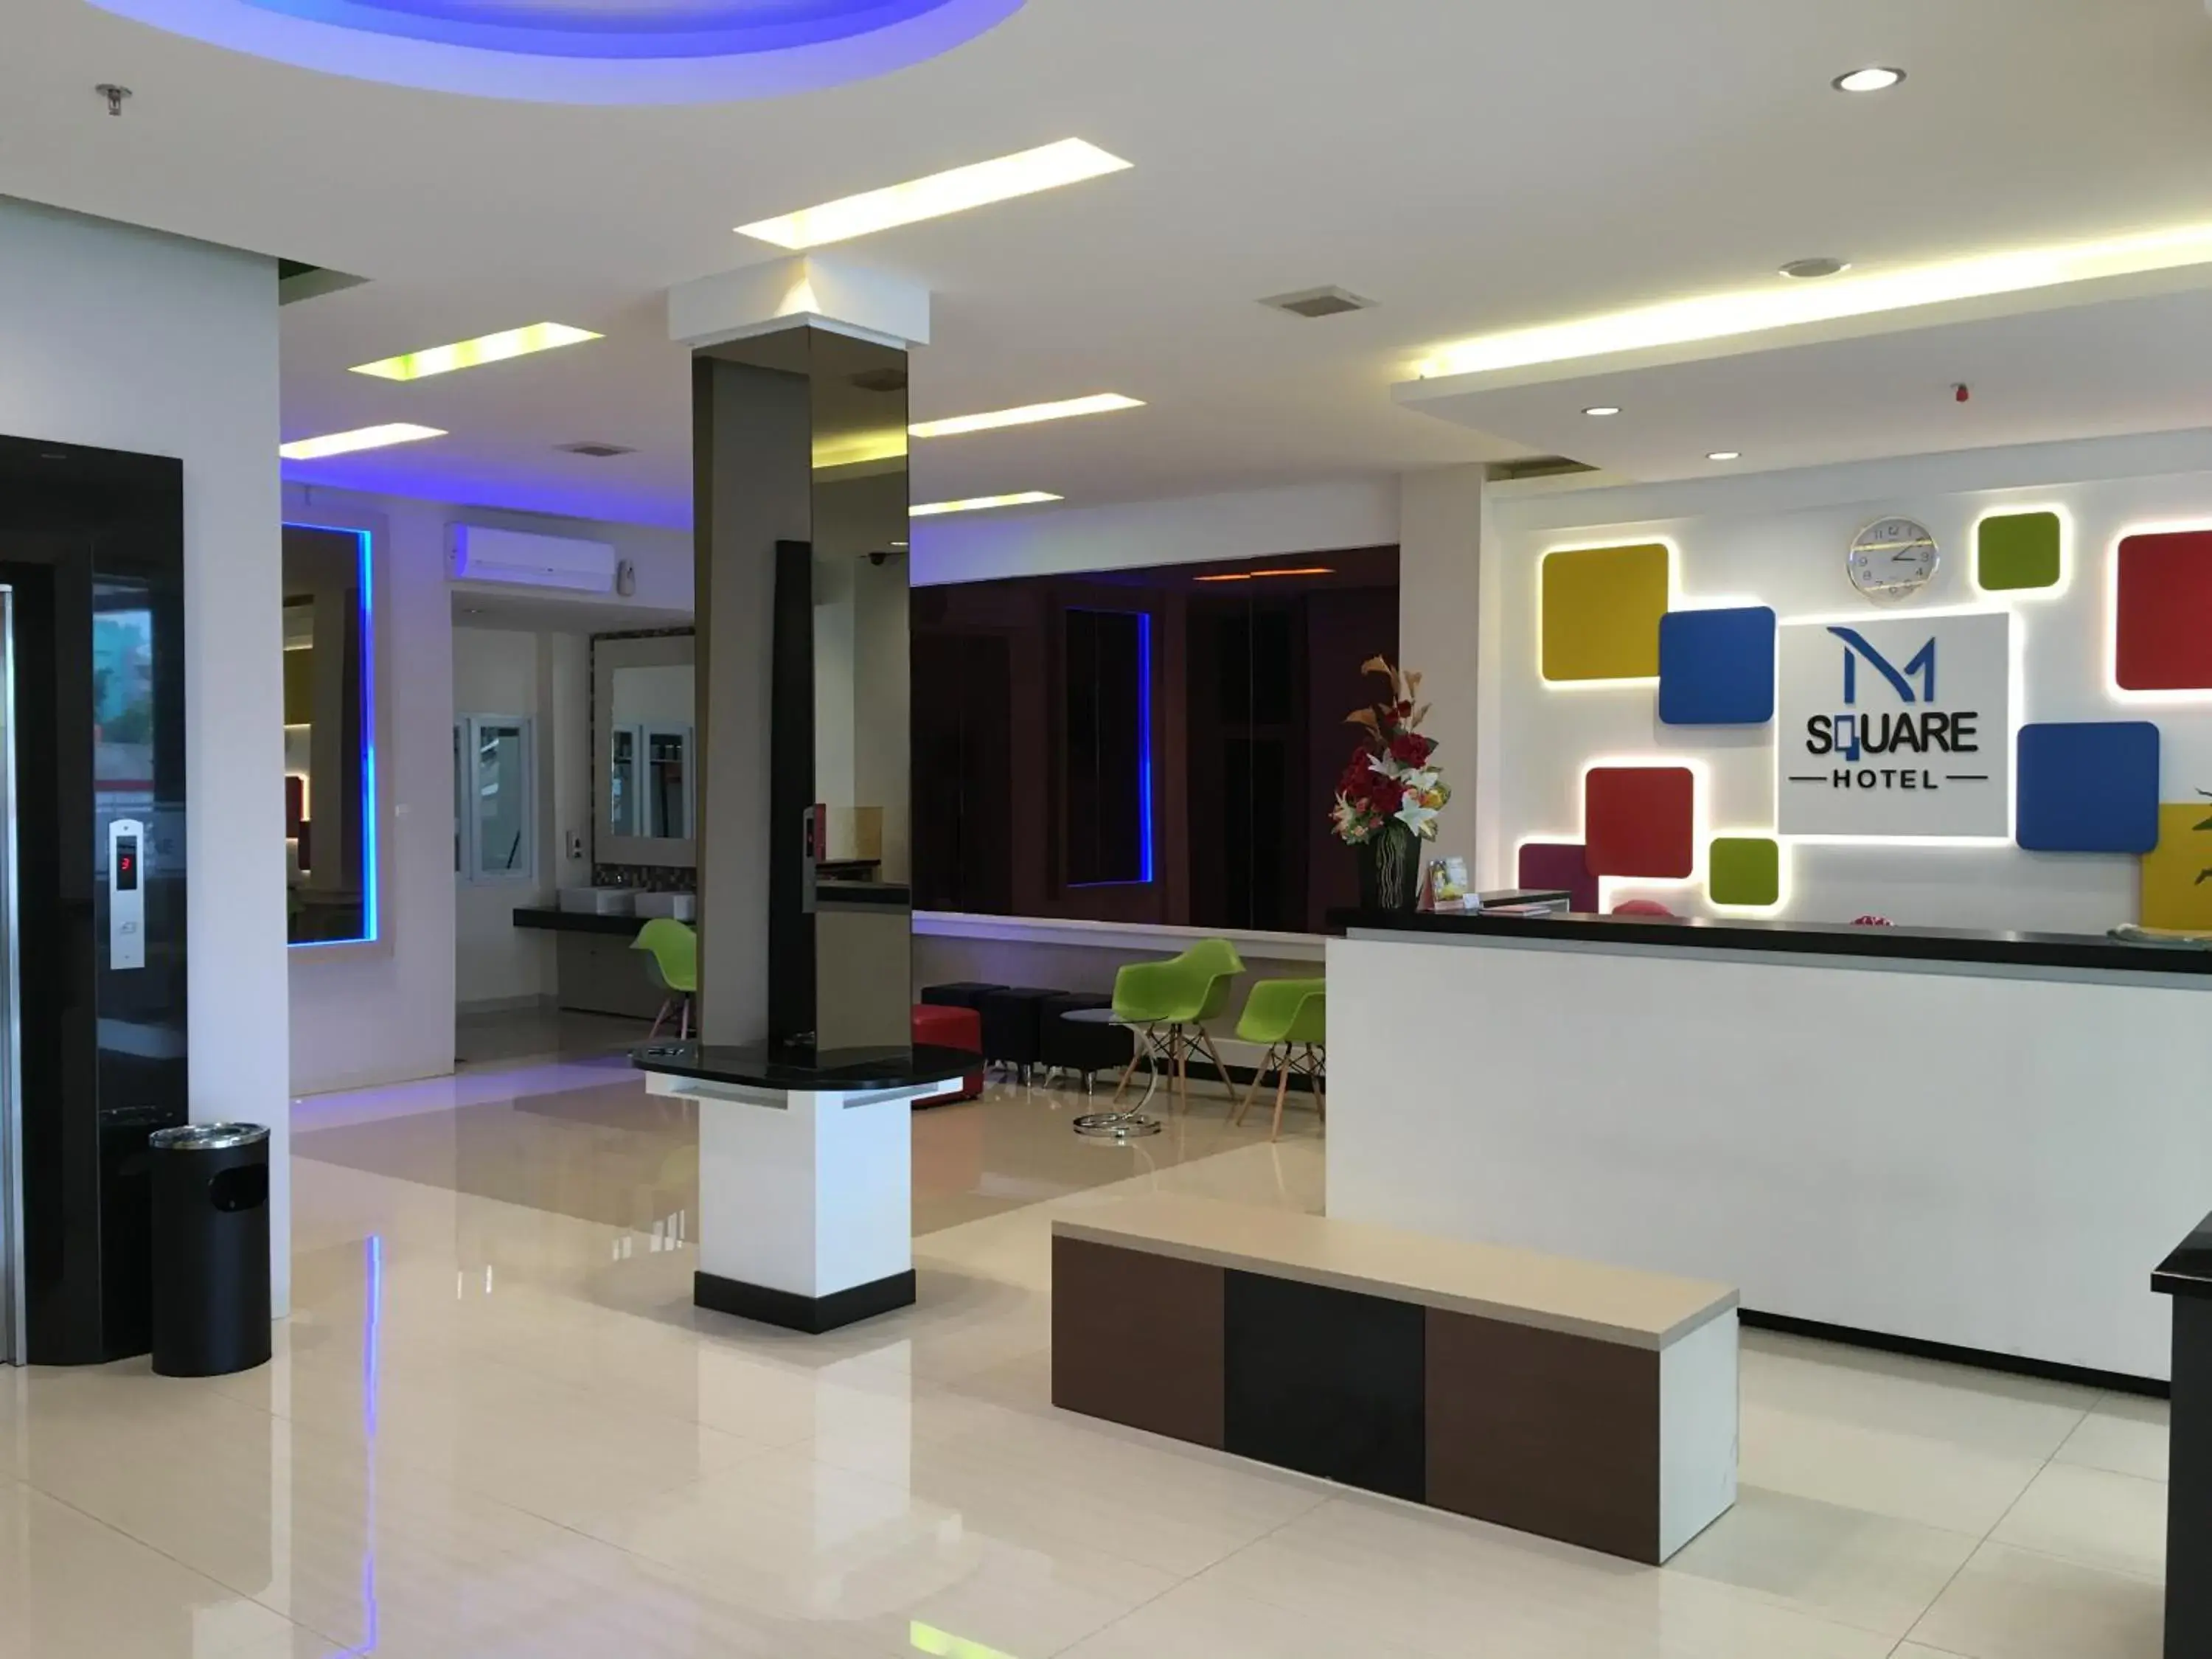 Lobby or reception, Lobby/Reception in Msquare Hotel